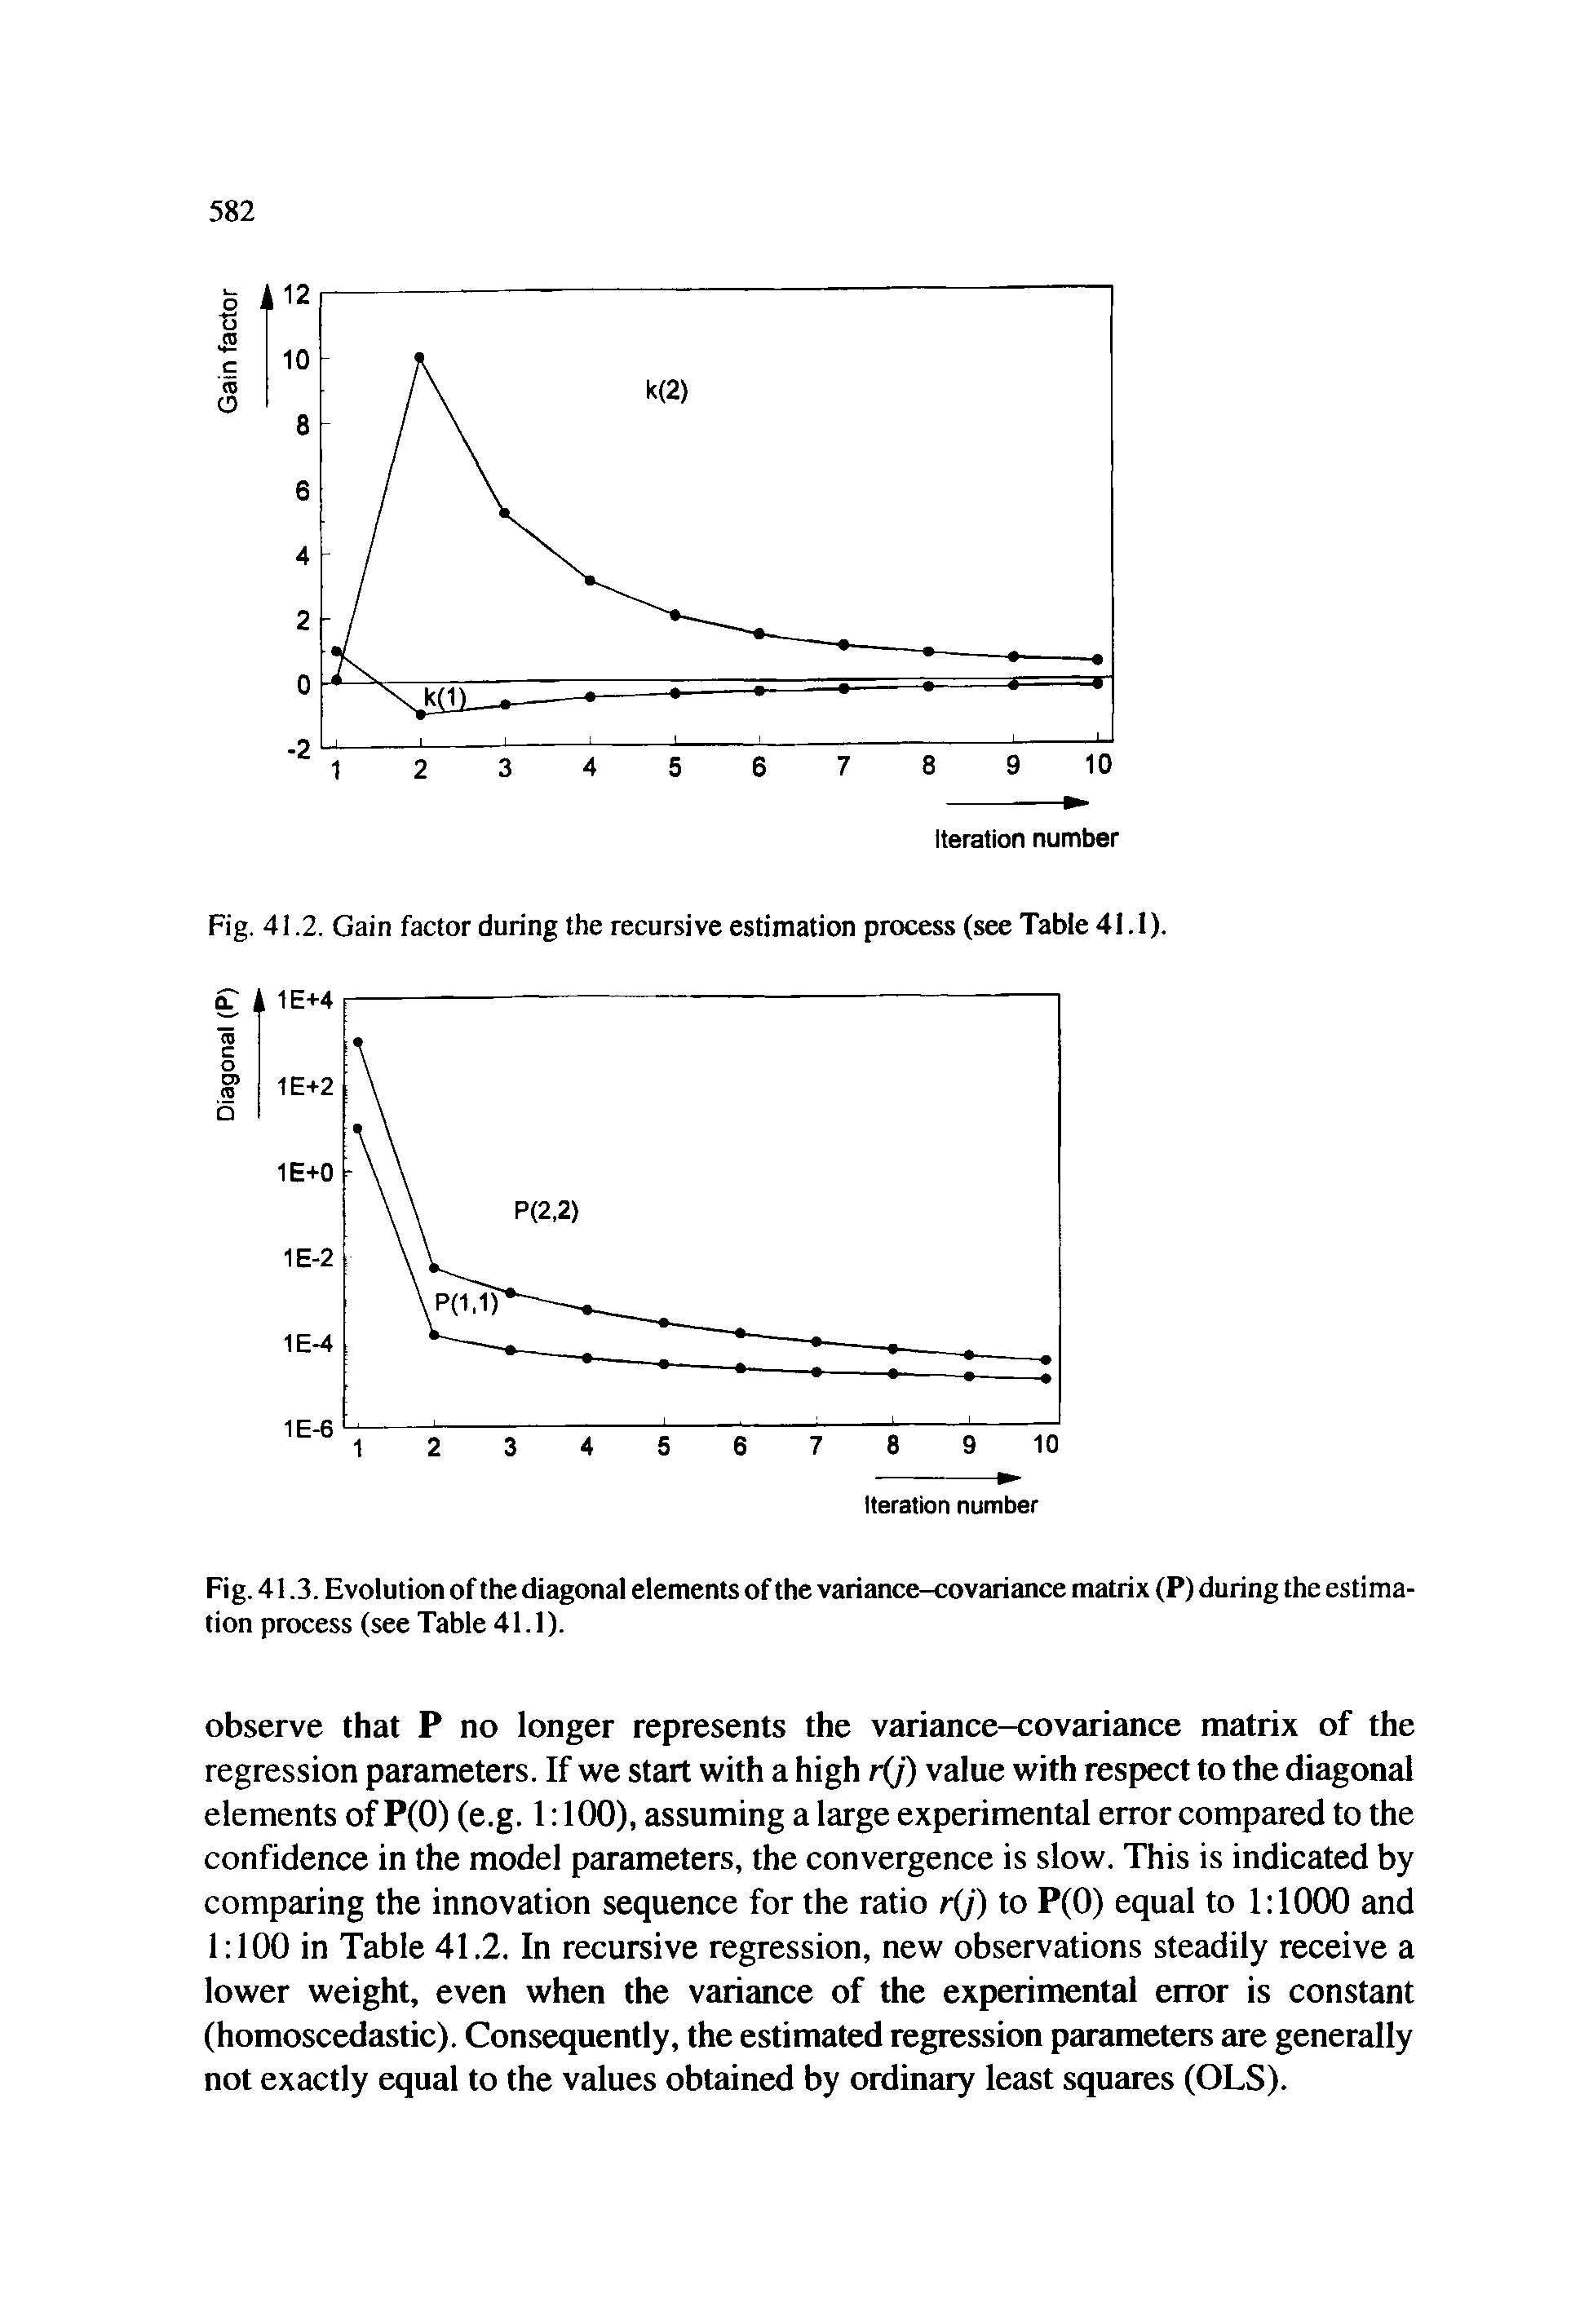 Fig. 41.2. Gain factor during the recursive estimation process (see Table 41.1).